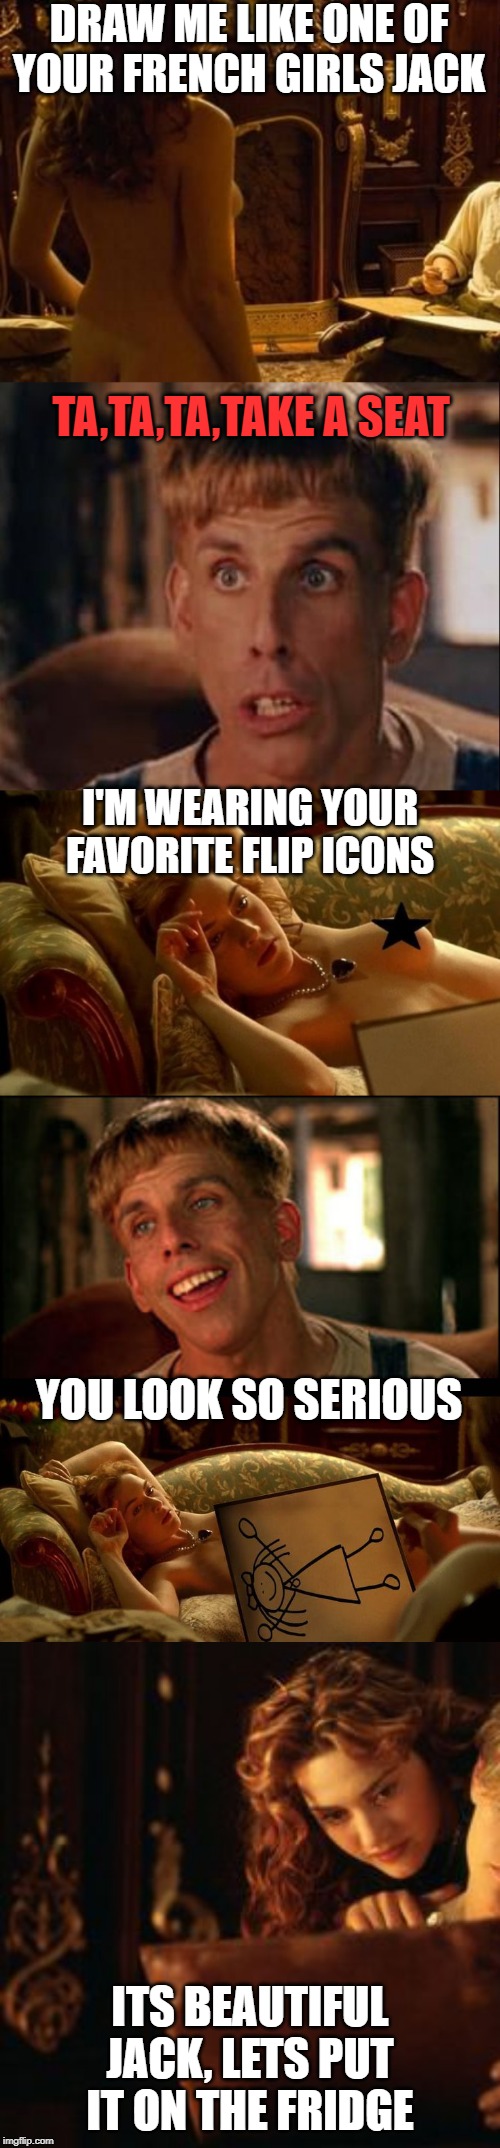 Simply inspired from a comment thread | DRAW ME LIKE ONE OF YOUR FRENCH GIRLS JACK; TA,TA,TA,TAKE A SEAT; I'M WEARING YOUR FAVORITE FLIP ICONS; YOU LOOK SO SERIOUS; ITS BEAUTIFUL JACK, LETS PUT IT ON THE FRIDGE | image tagged in simple jack,titanic,true story | made w/ Imgflip meme maker